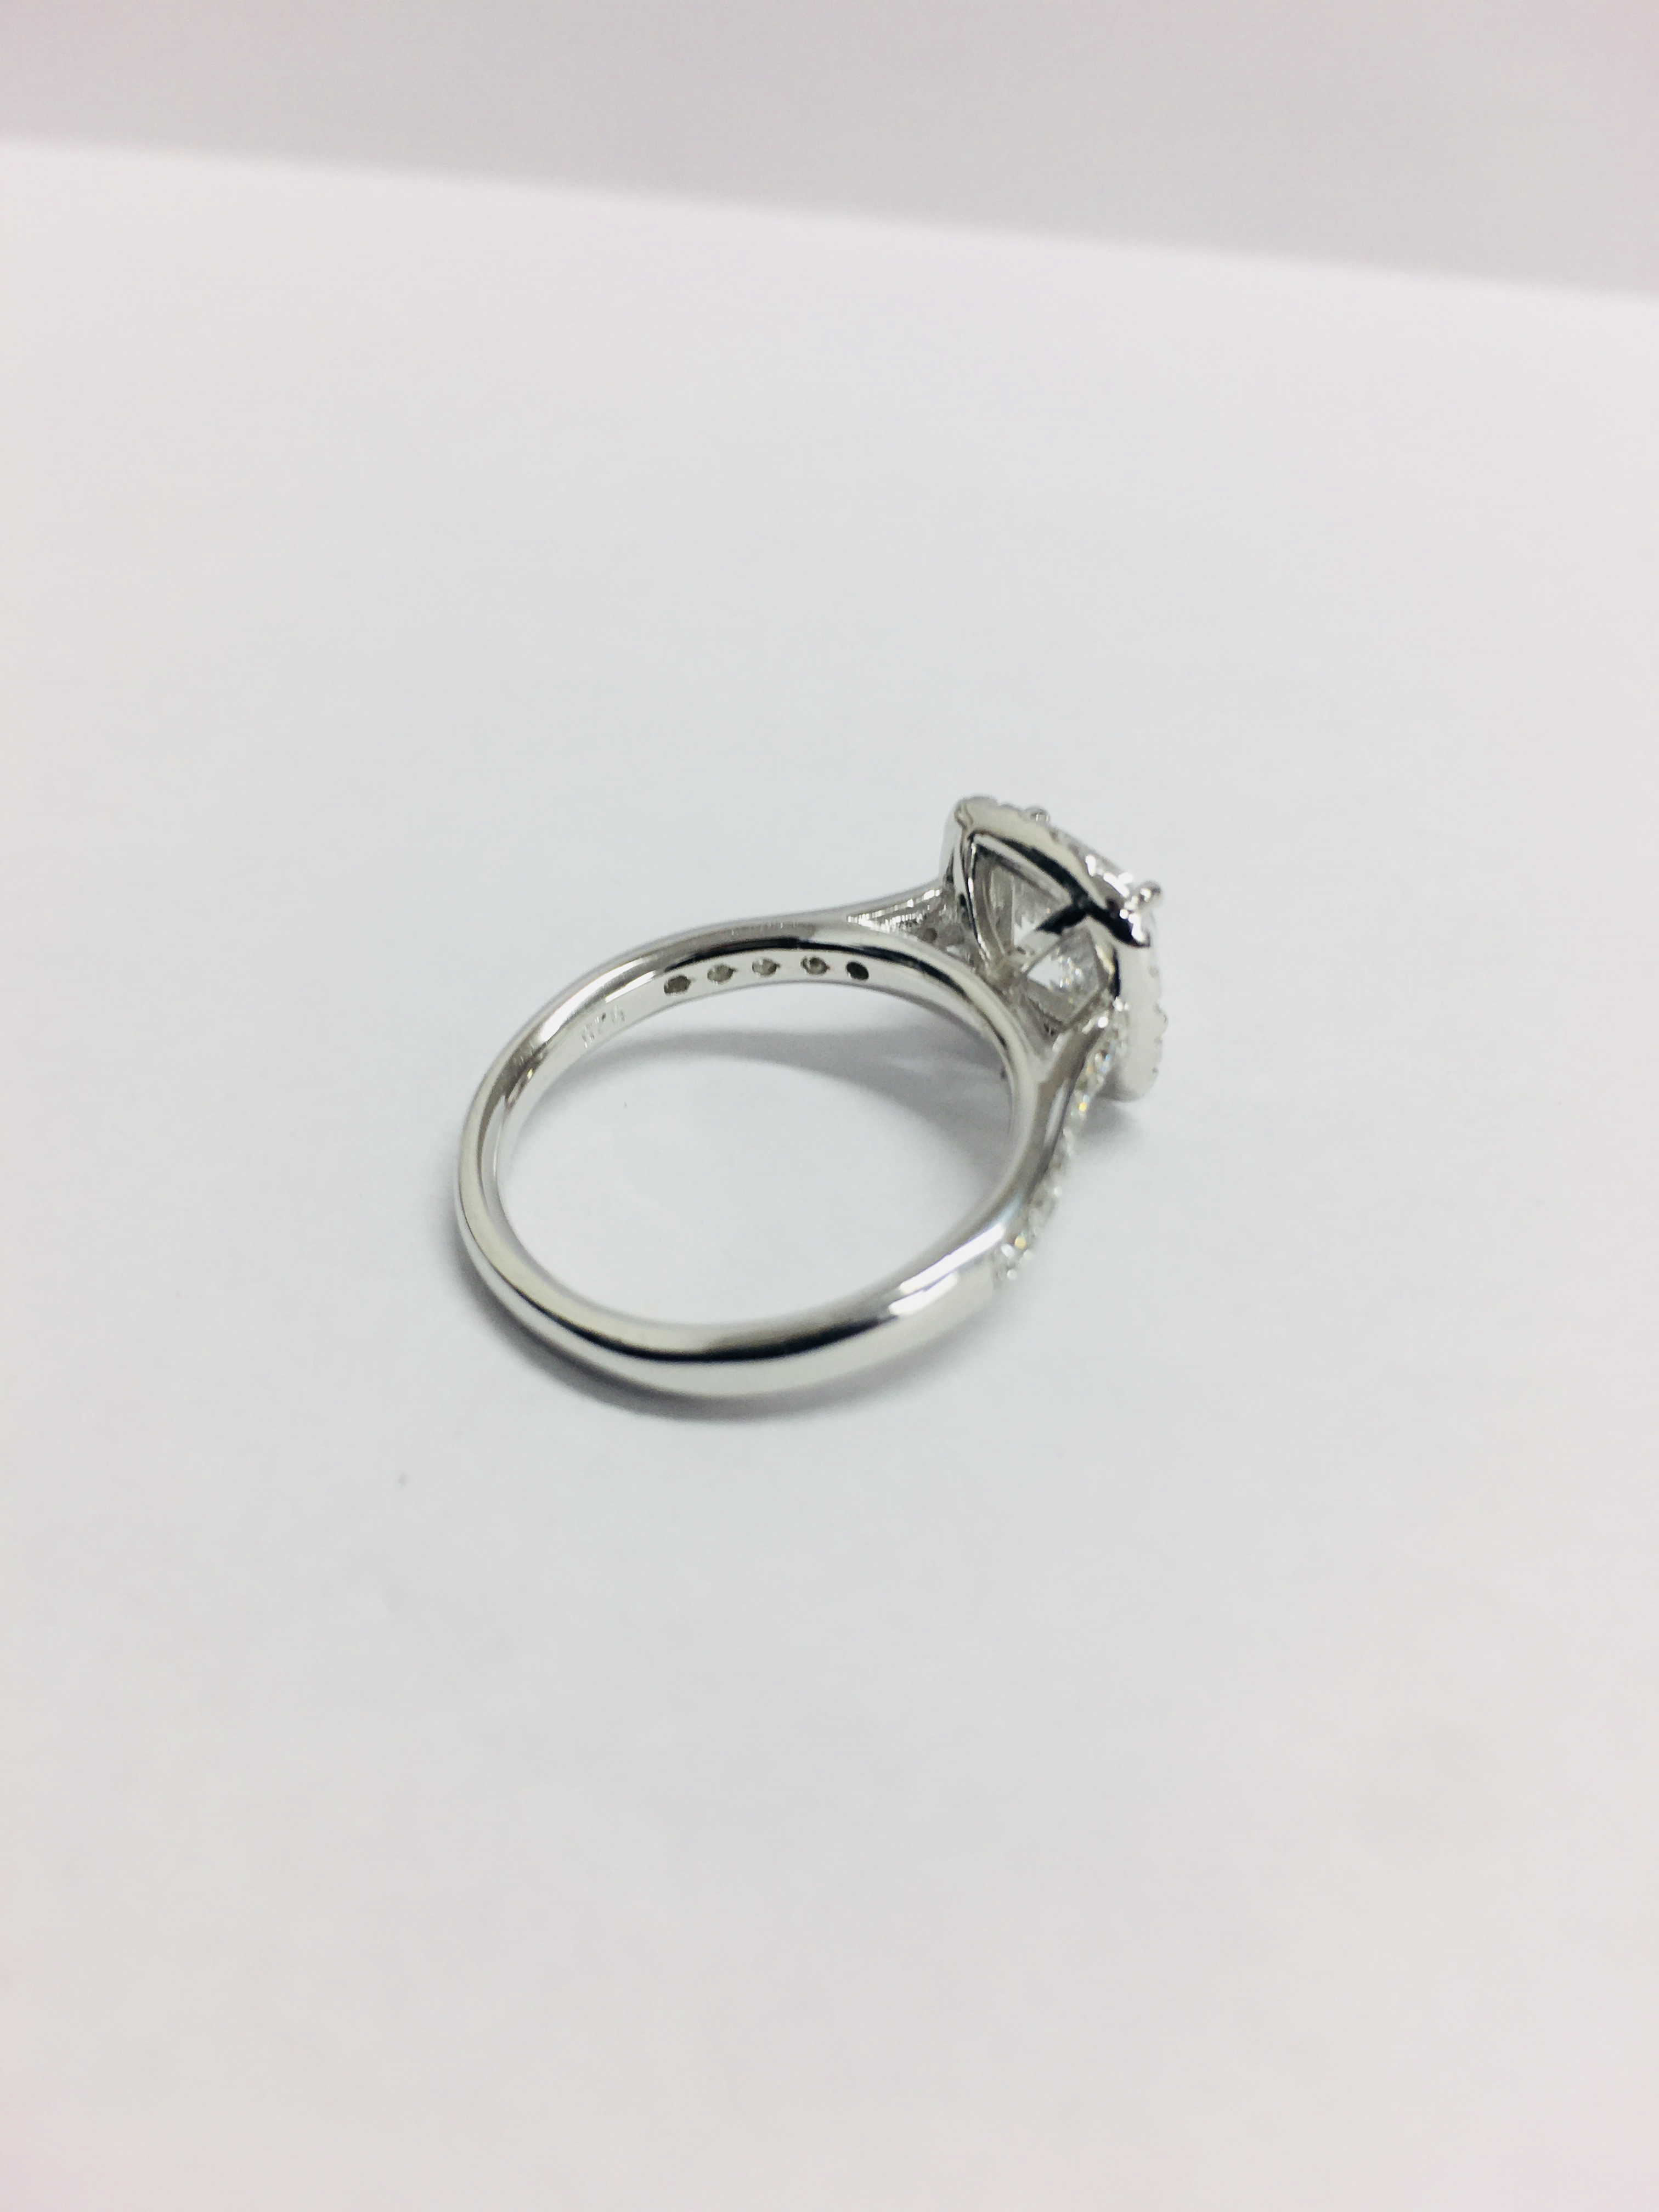 1.00ct diamond set solitaire with a cushion cut diamond - Image 4 of 6